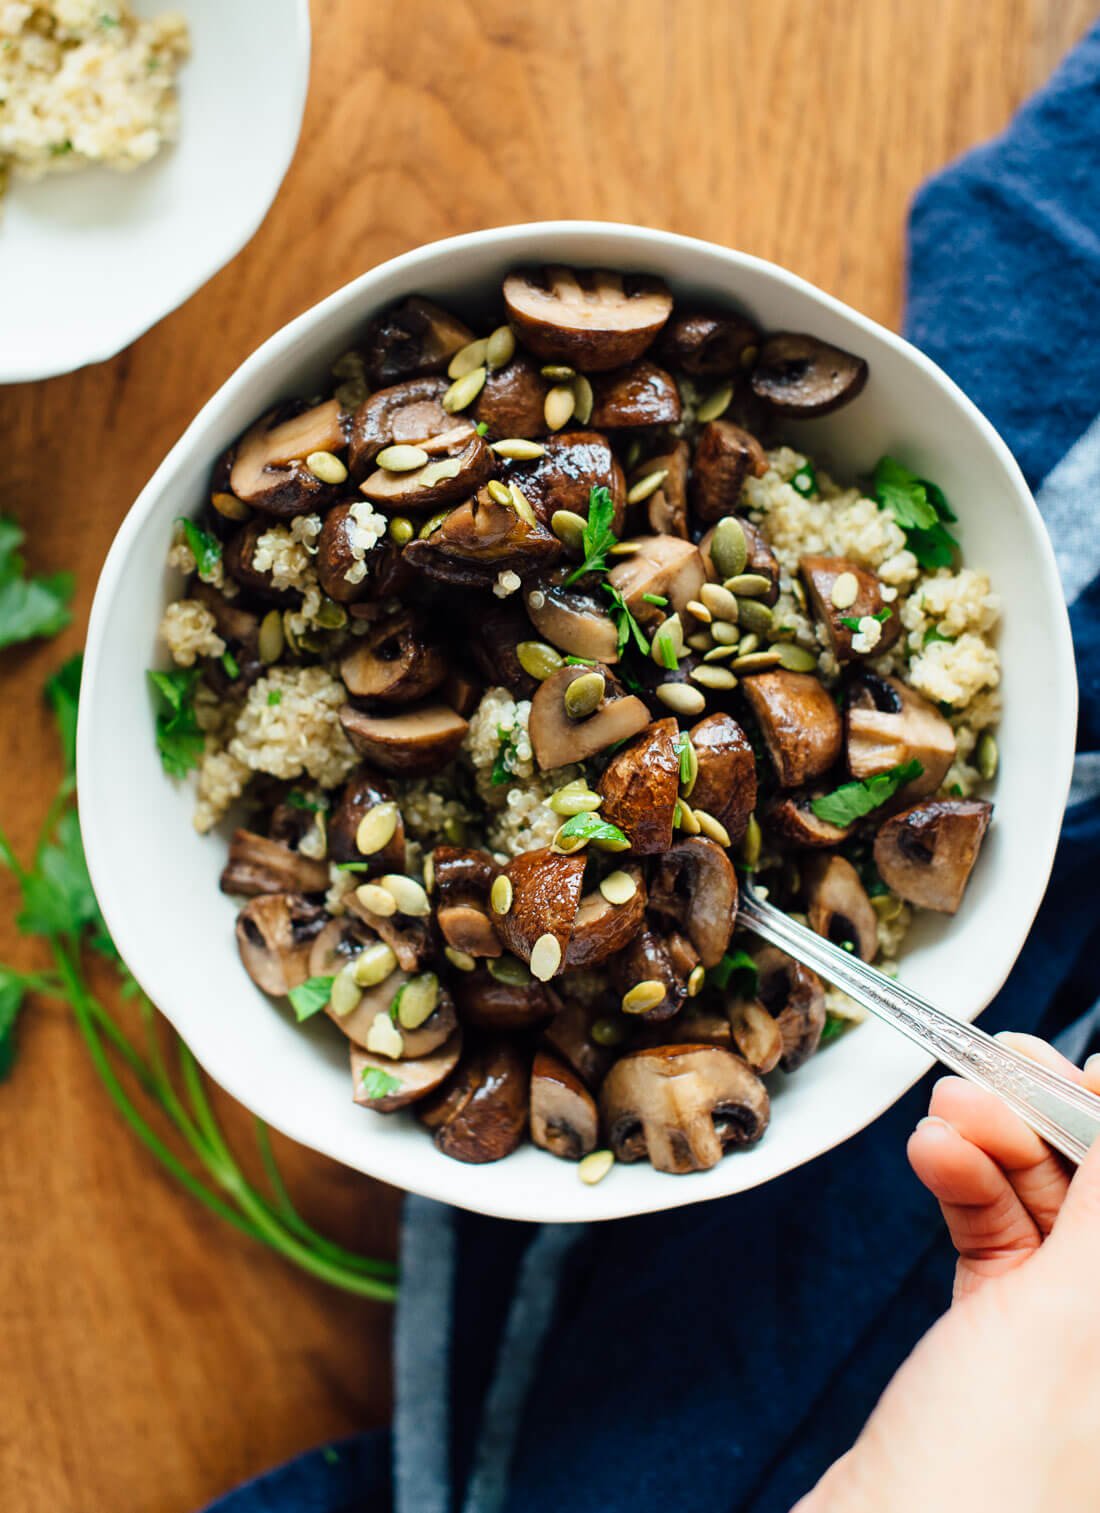 Healthy side dish or light dinner recipe—roasted mushrooms on herbed quinoa!